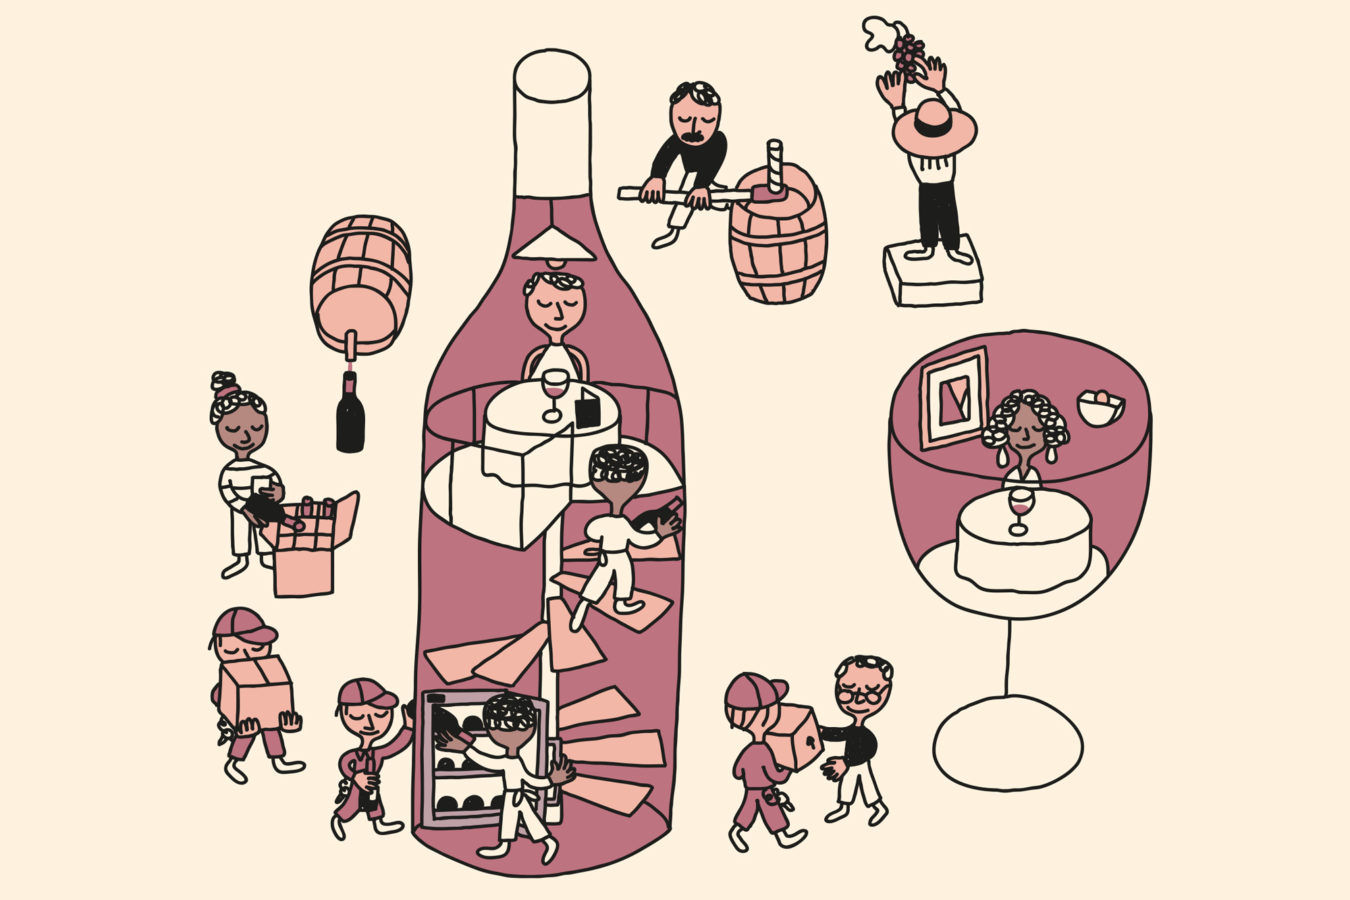 This is why wine costs so much at restaurants